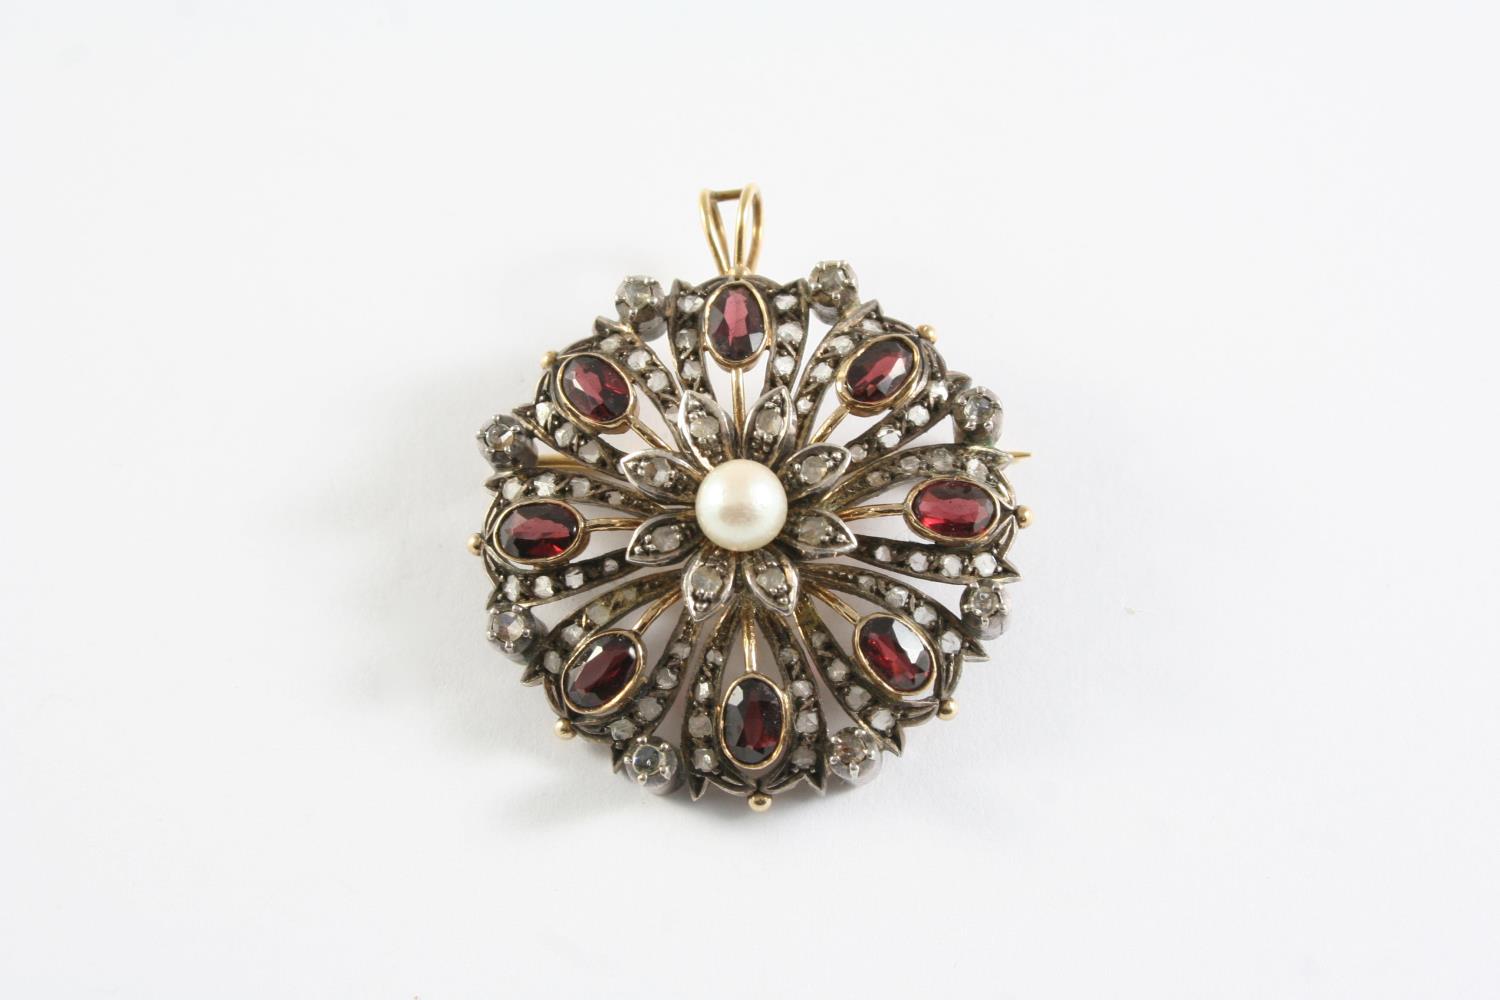 A VICTORIAN GARNET AND DIAMOND BROOCH PENDANT the flowerhead brooch is centred with a small pearl